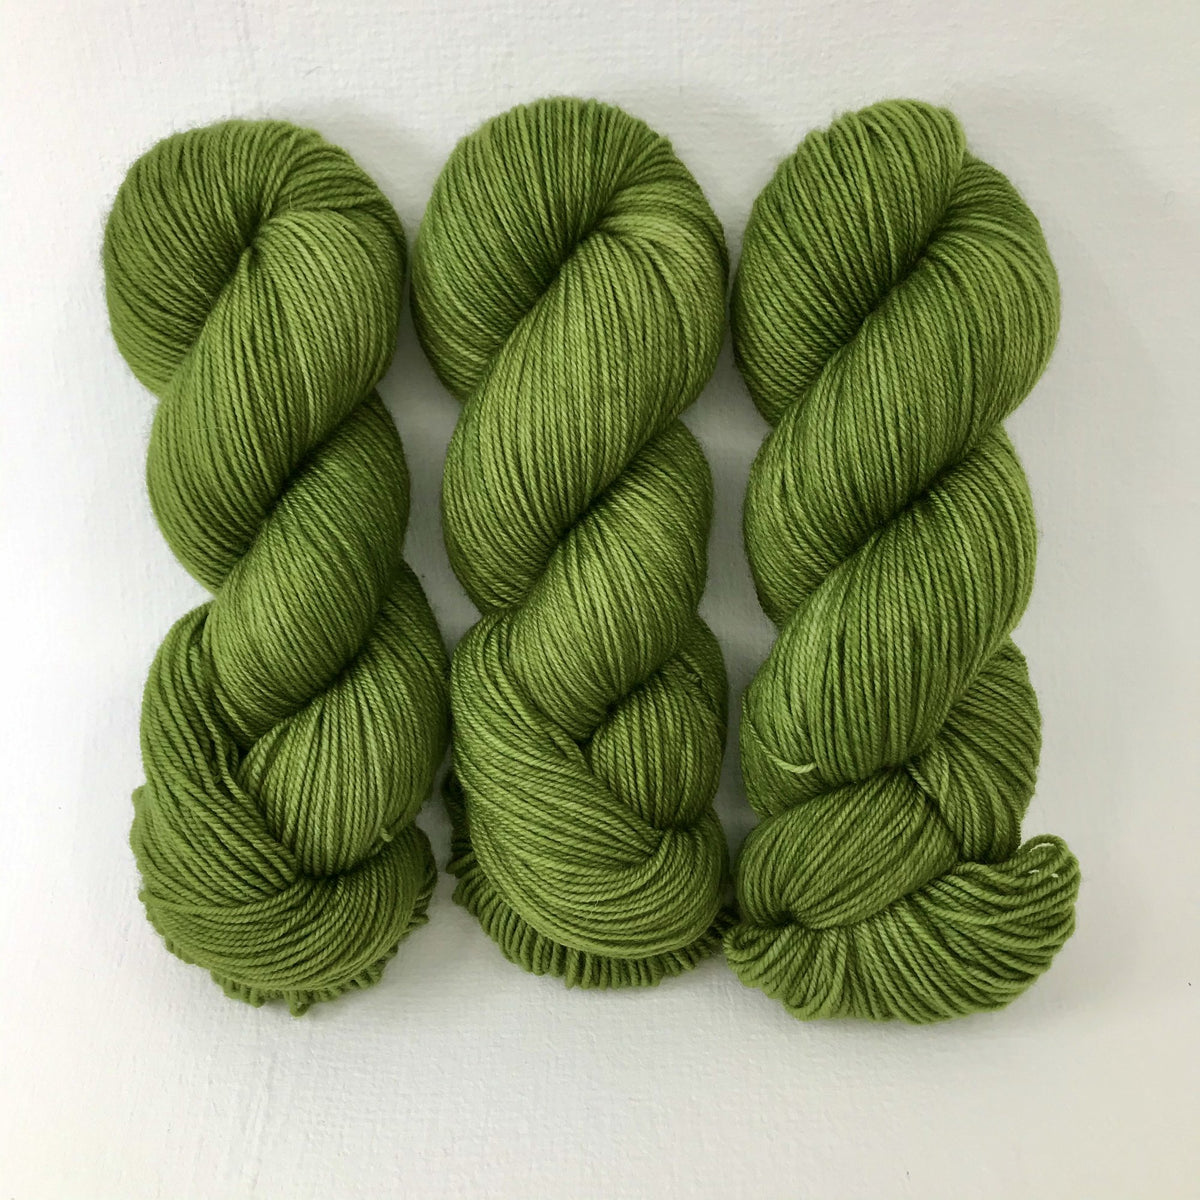 Mossy Bank - Passion 8 Fingering - Dyed Stock